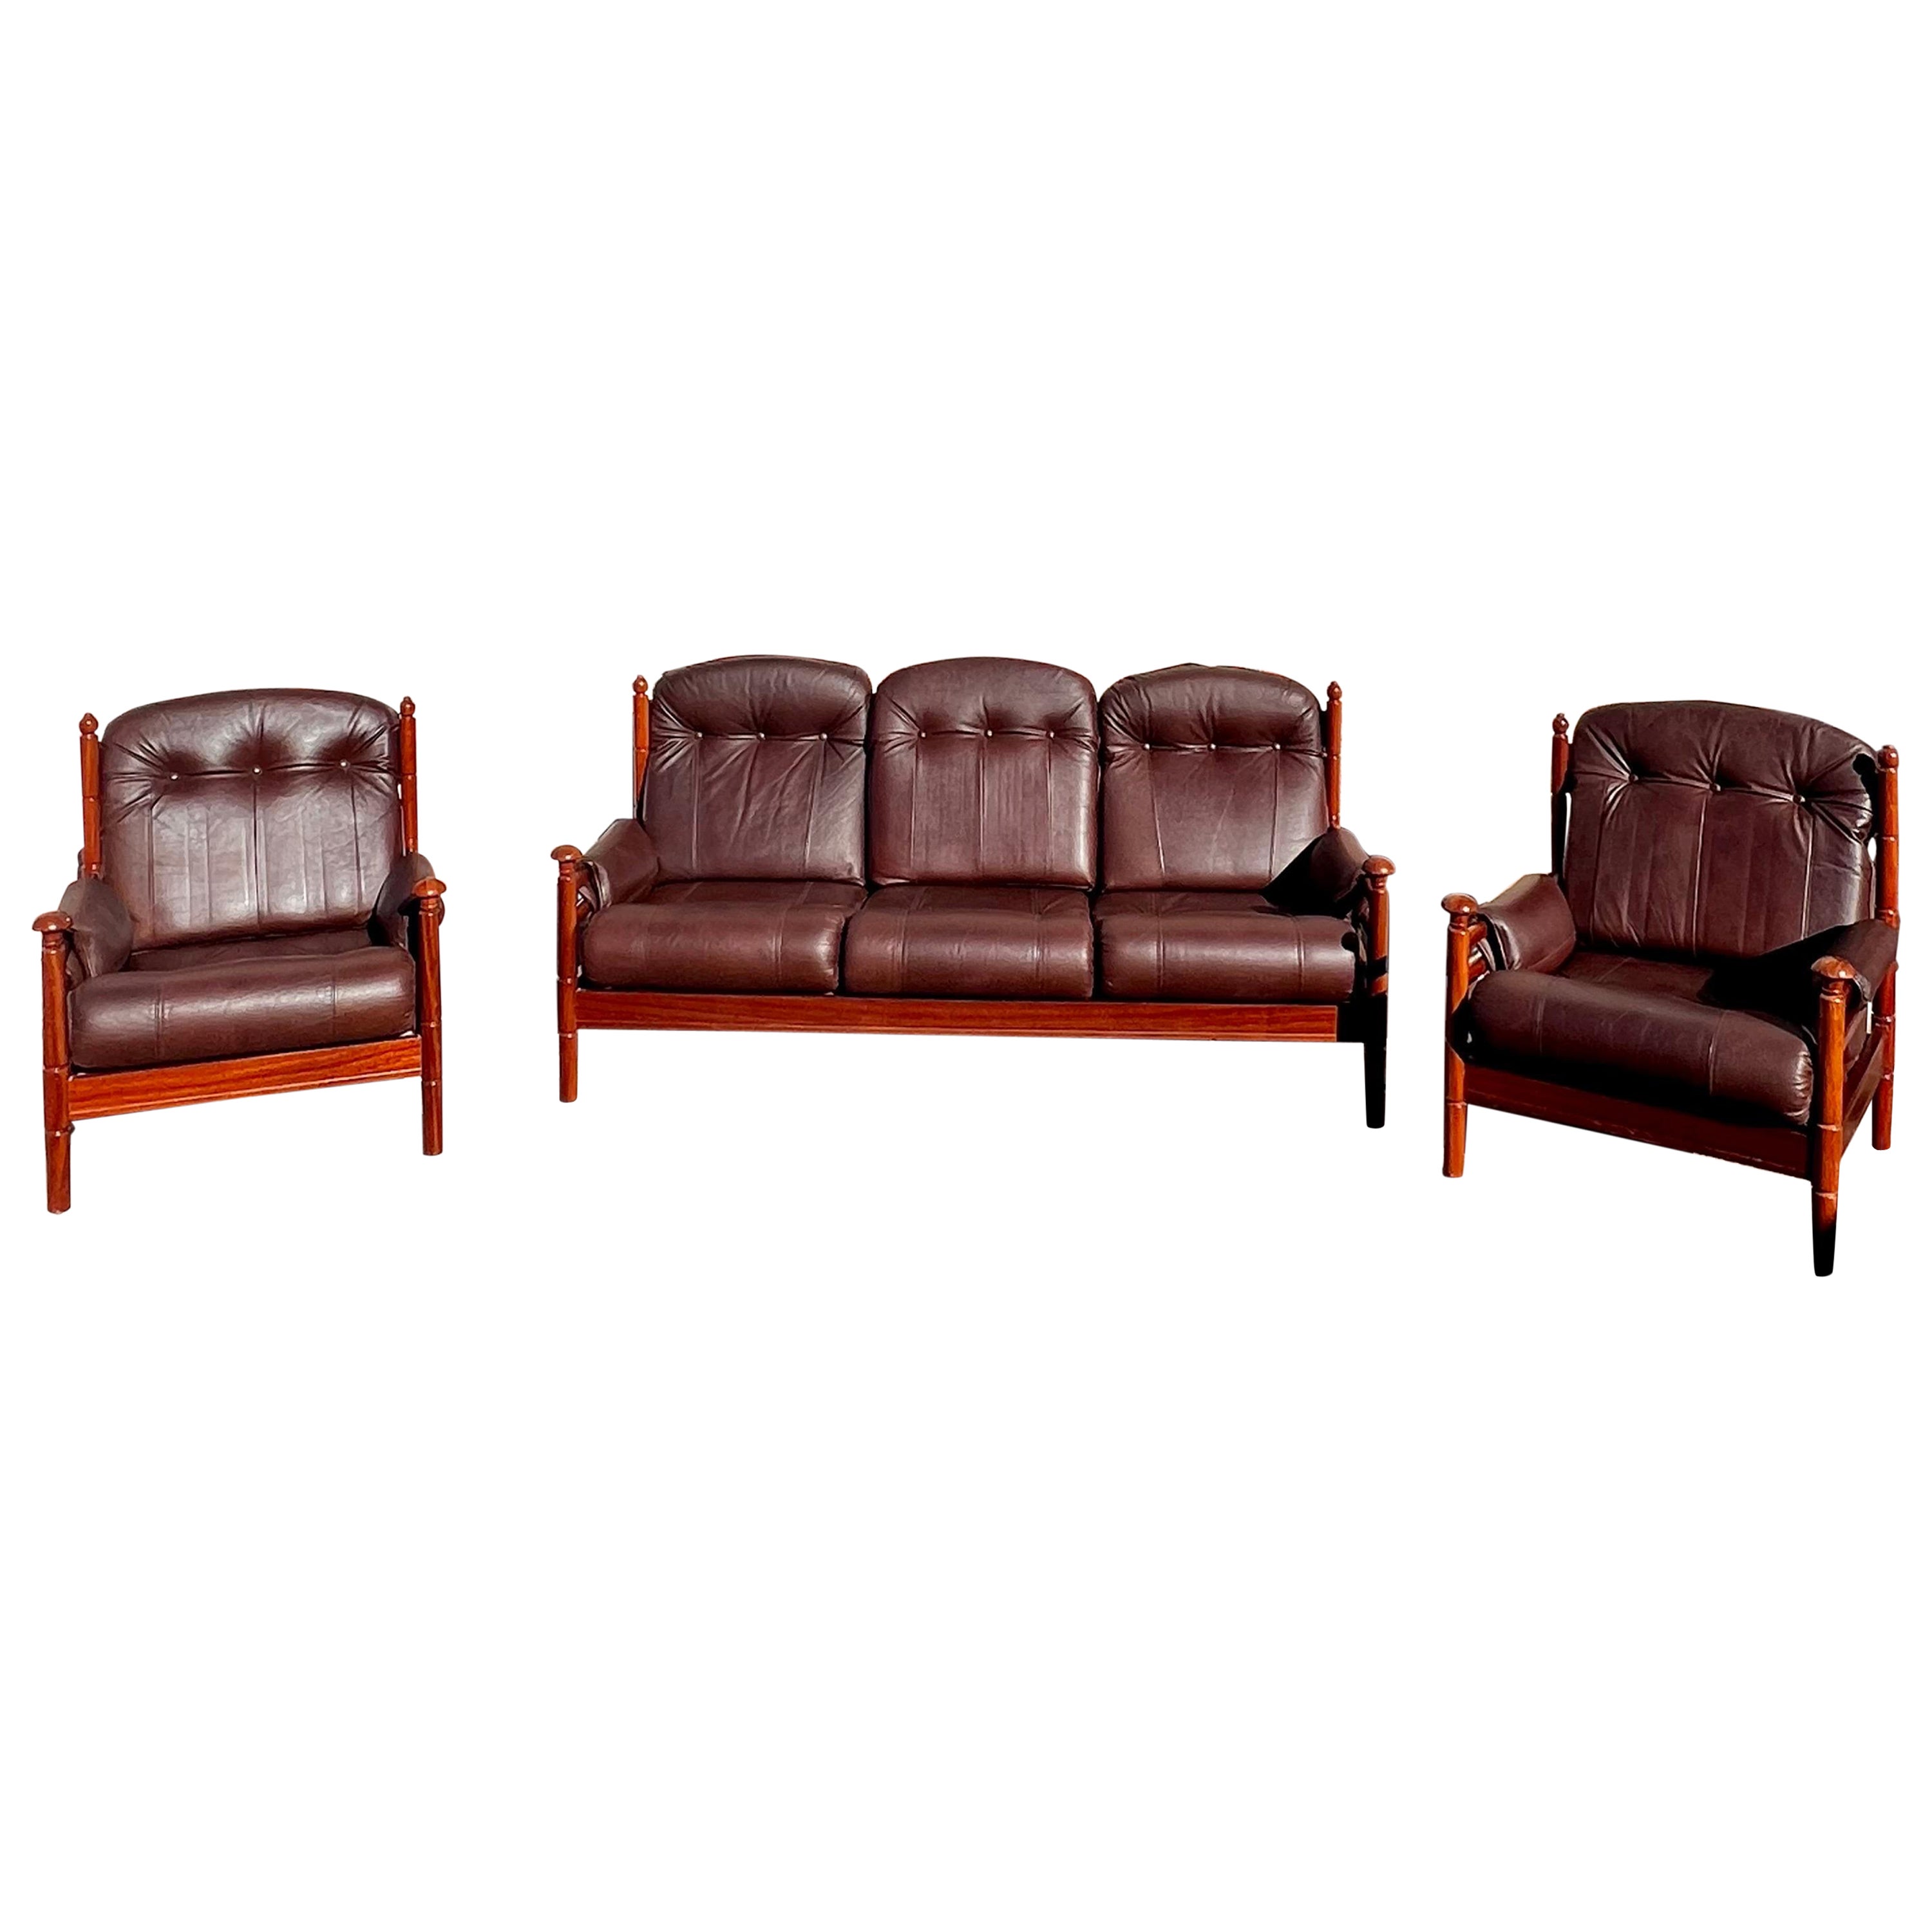 *This listing is for one sofa, side chairs have sold*

Vintage Scandinavian style mid century modernbrown leather sofa by Reid. Includes l 1 sofa, the side chairs have sold. Overall in excellent condition.

Dimensions: 
Sofa: 35” H x 72” W x 36” D